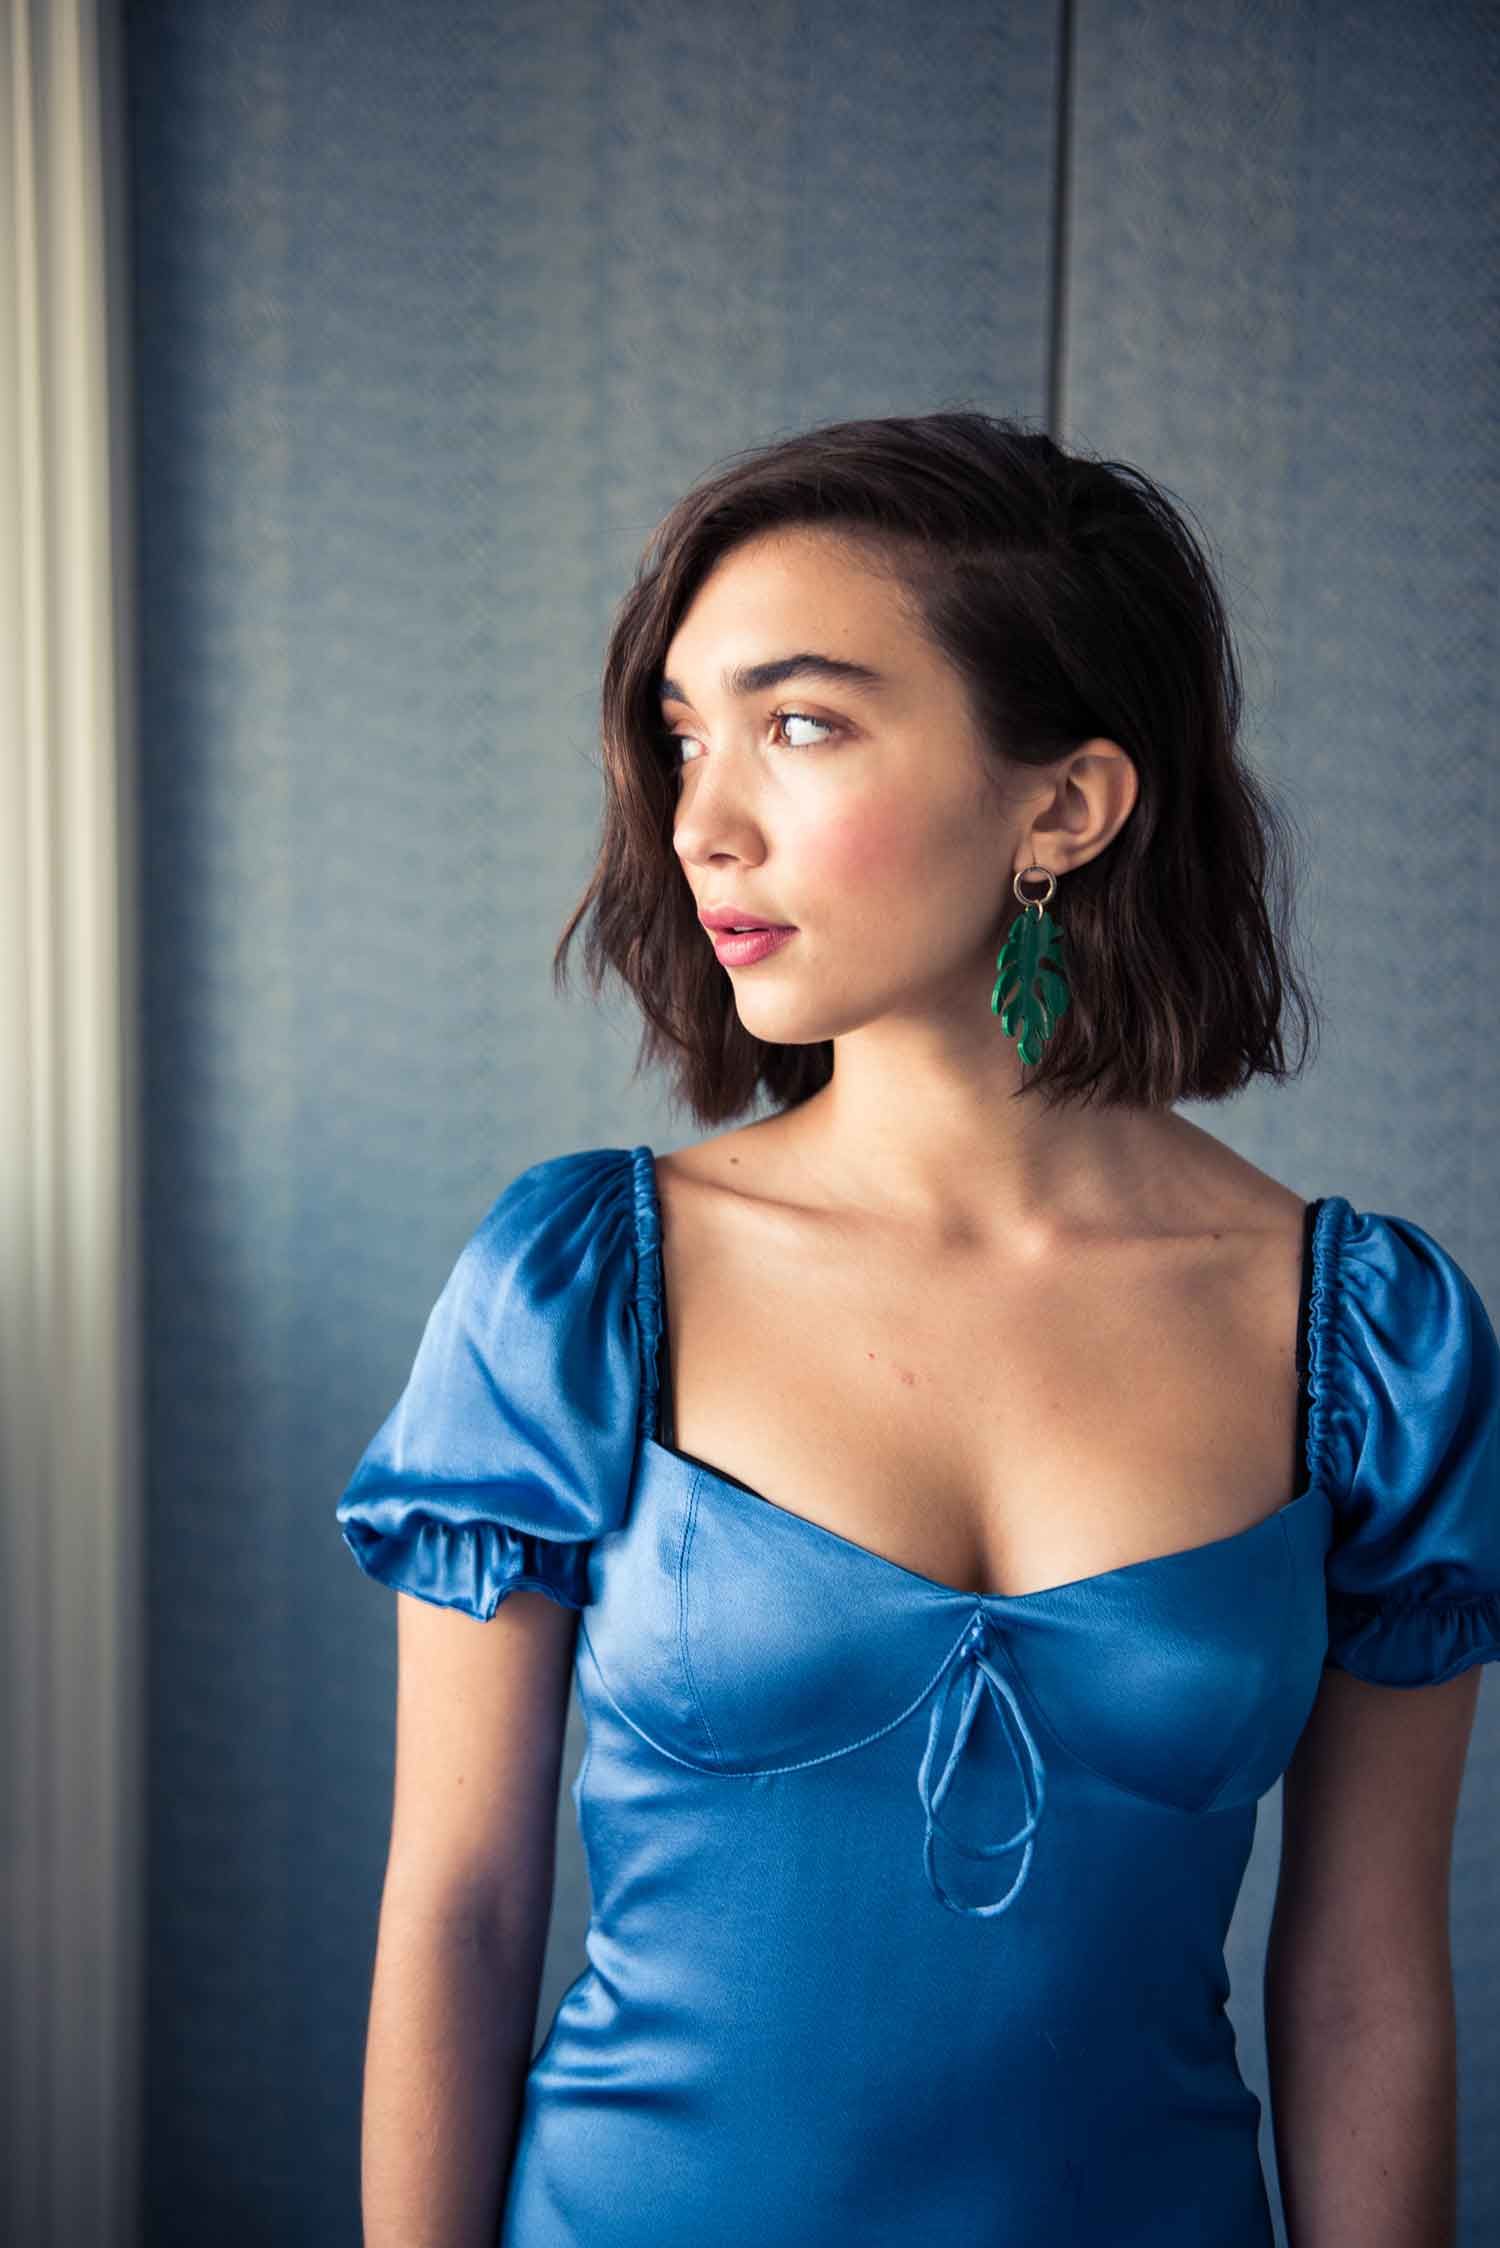 aditya hartanto recommends pictures of rowan blanchard naked pic